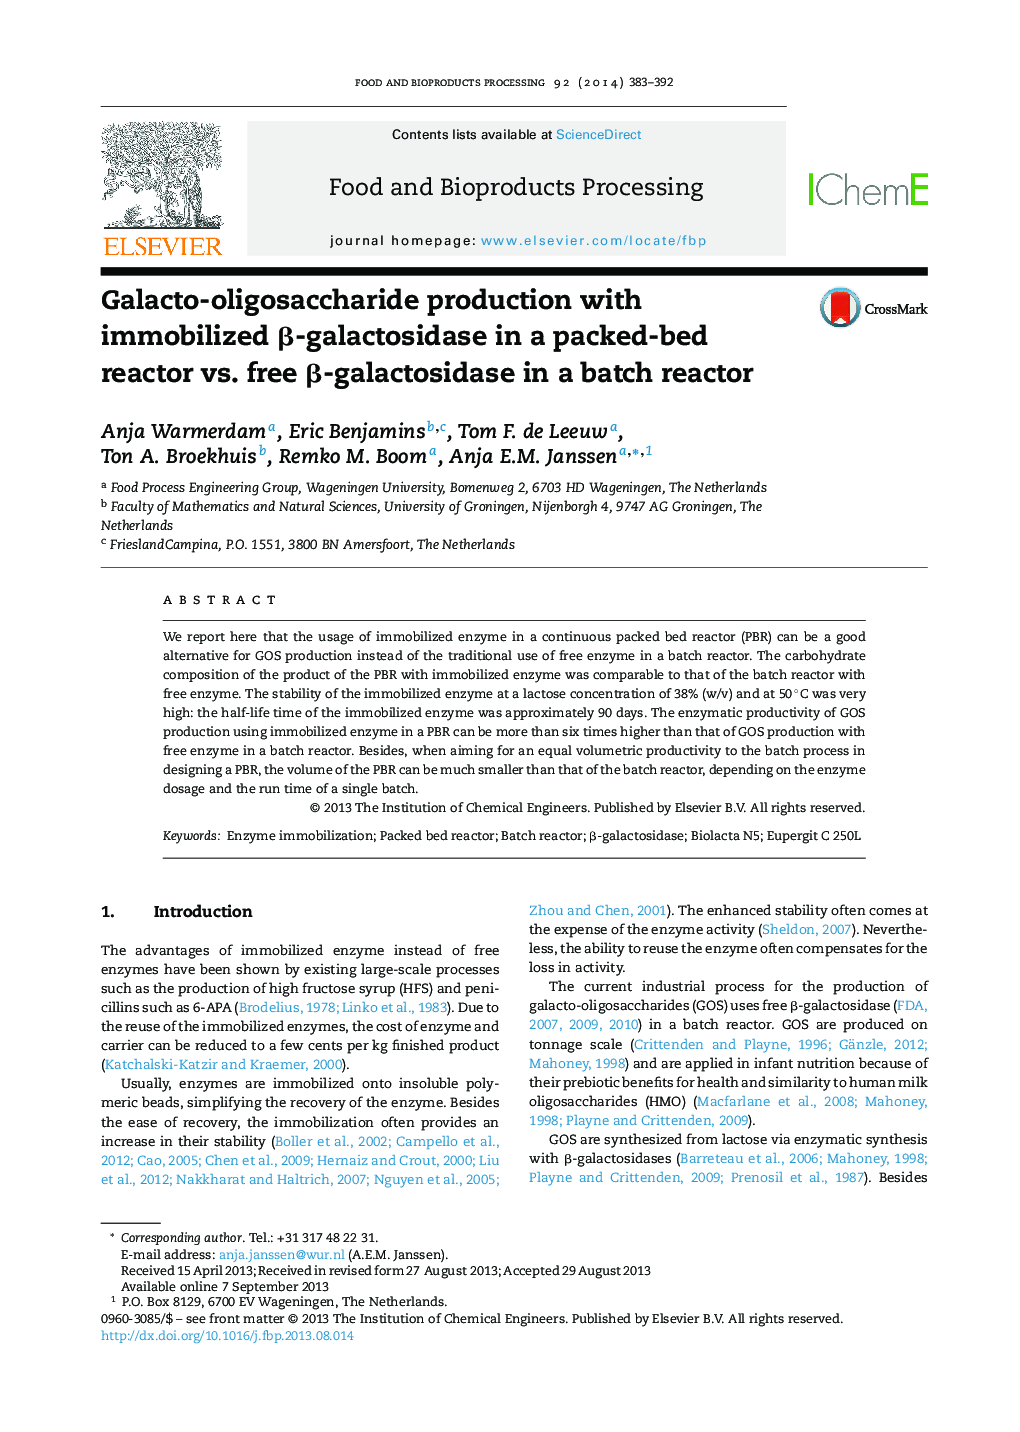 Galacto-oligosaccharide production with immobilized β-galactosidase in a packed-bed reactor vs. free β-galactosidase in a batch reactor